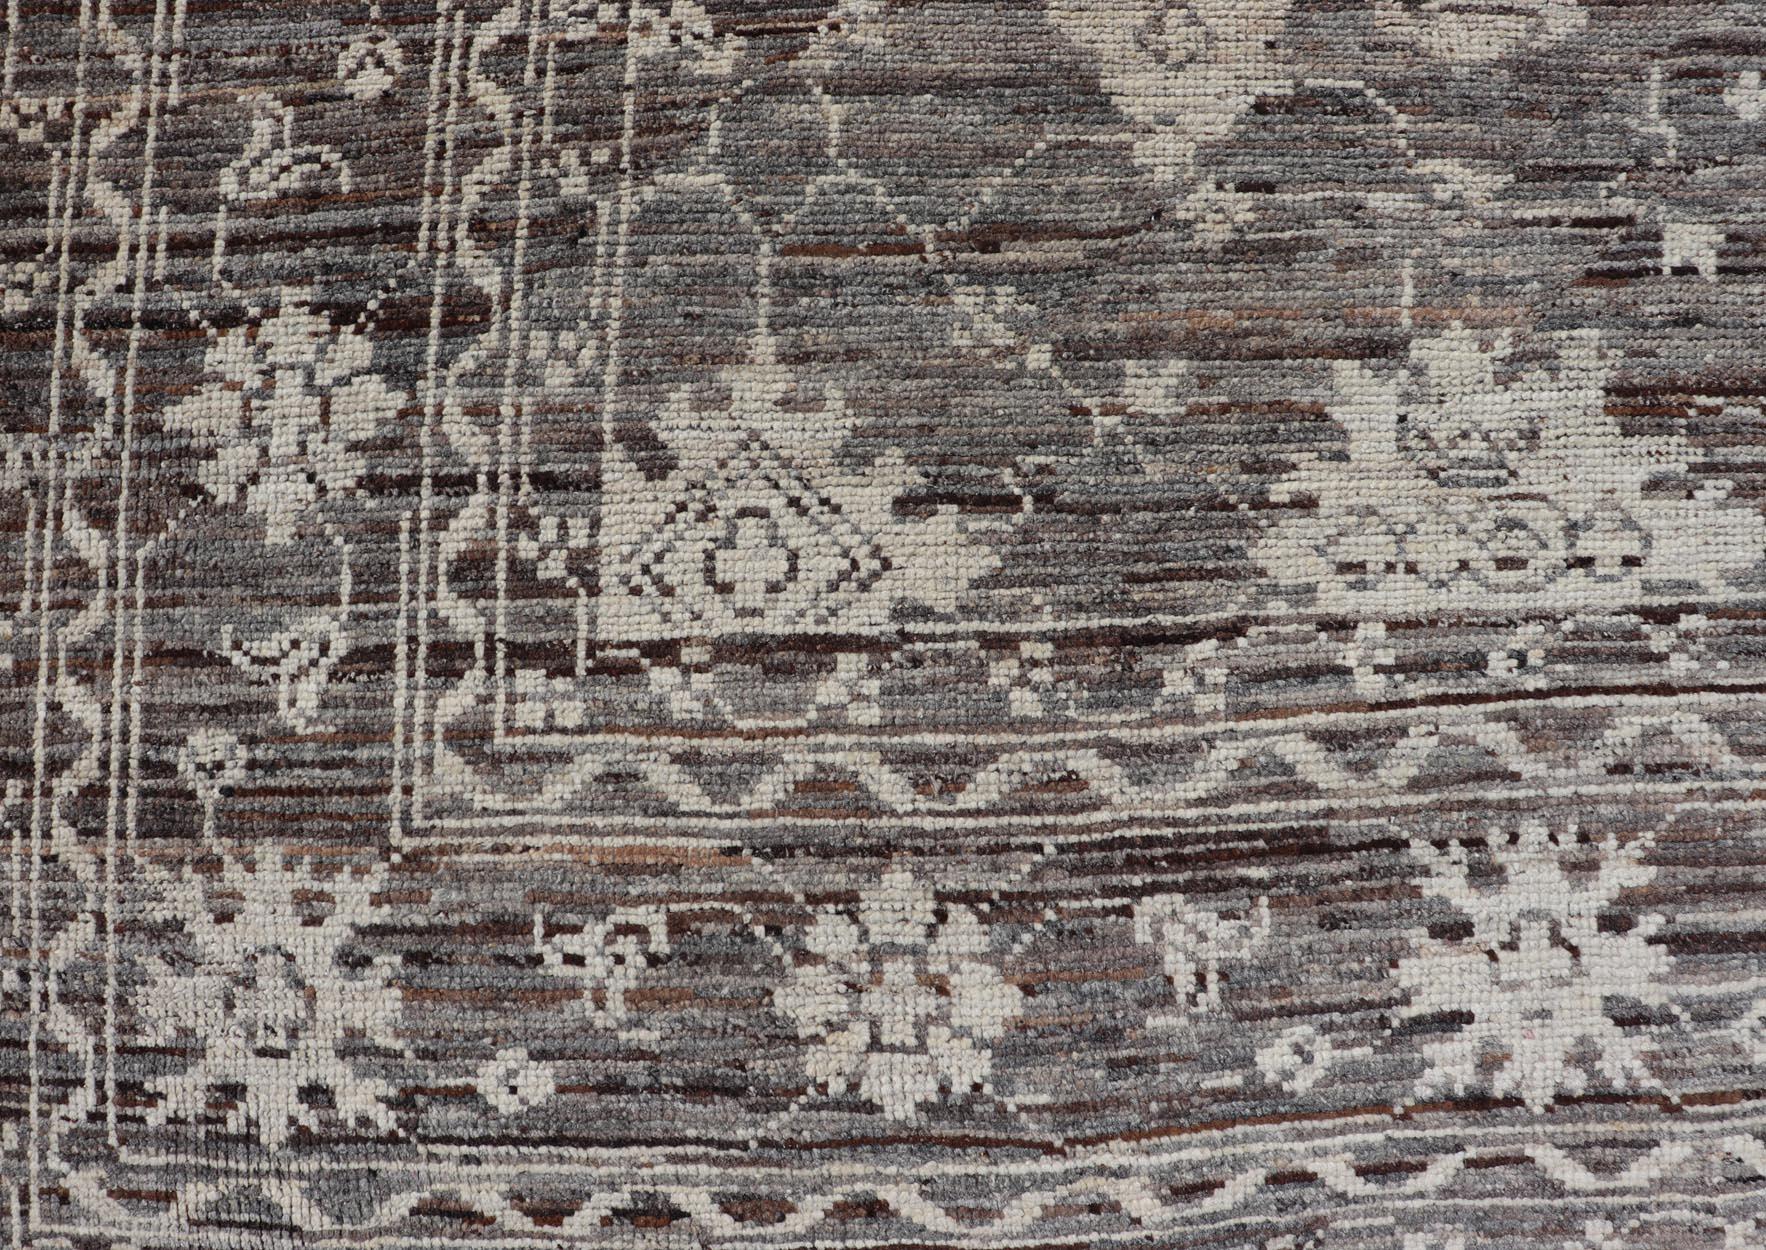 This modern casual rug has been hand-knotted. The rug features a modern sub-geometric Oushak design, replete with various motifs, the rug is rendered in earthy and neutral tones; making this rug a superb fit for a variety of classic, modern, casual